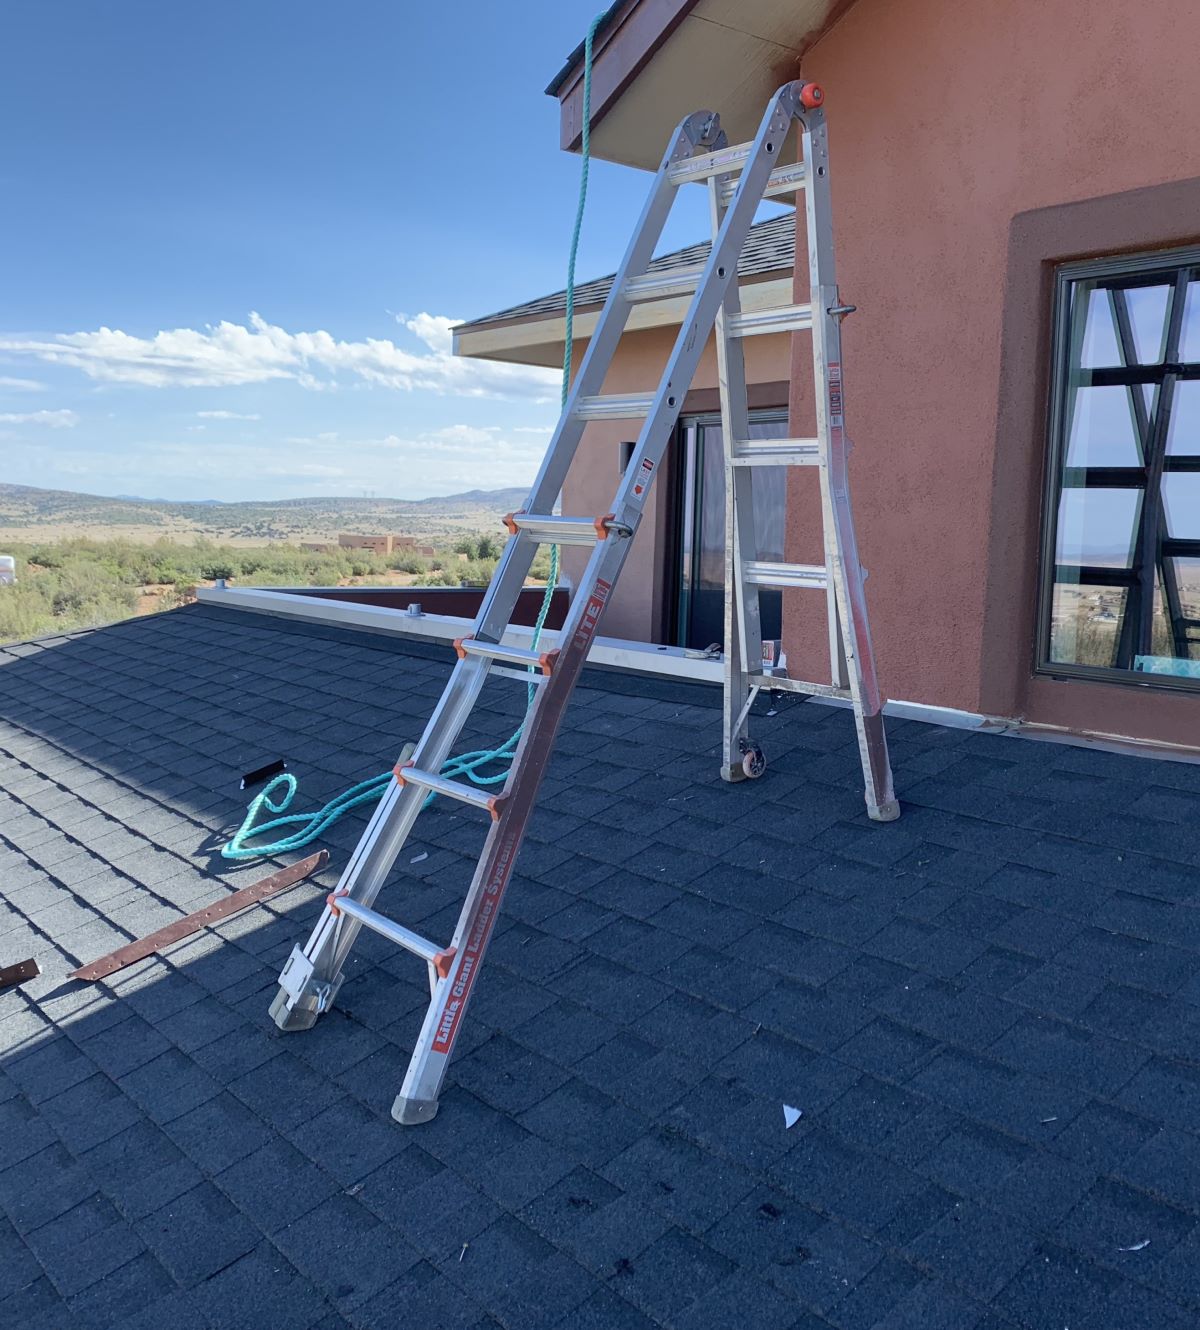 How To Use A Ladder On A Sloped Roof